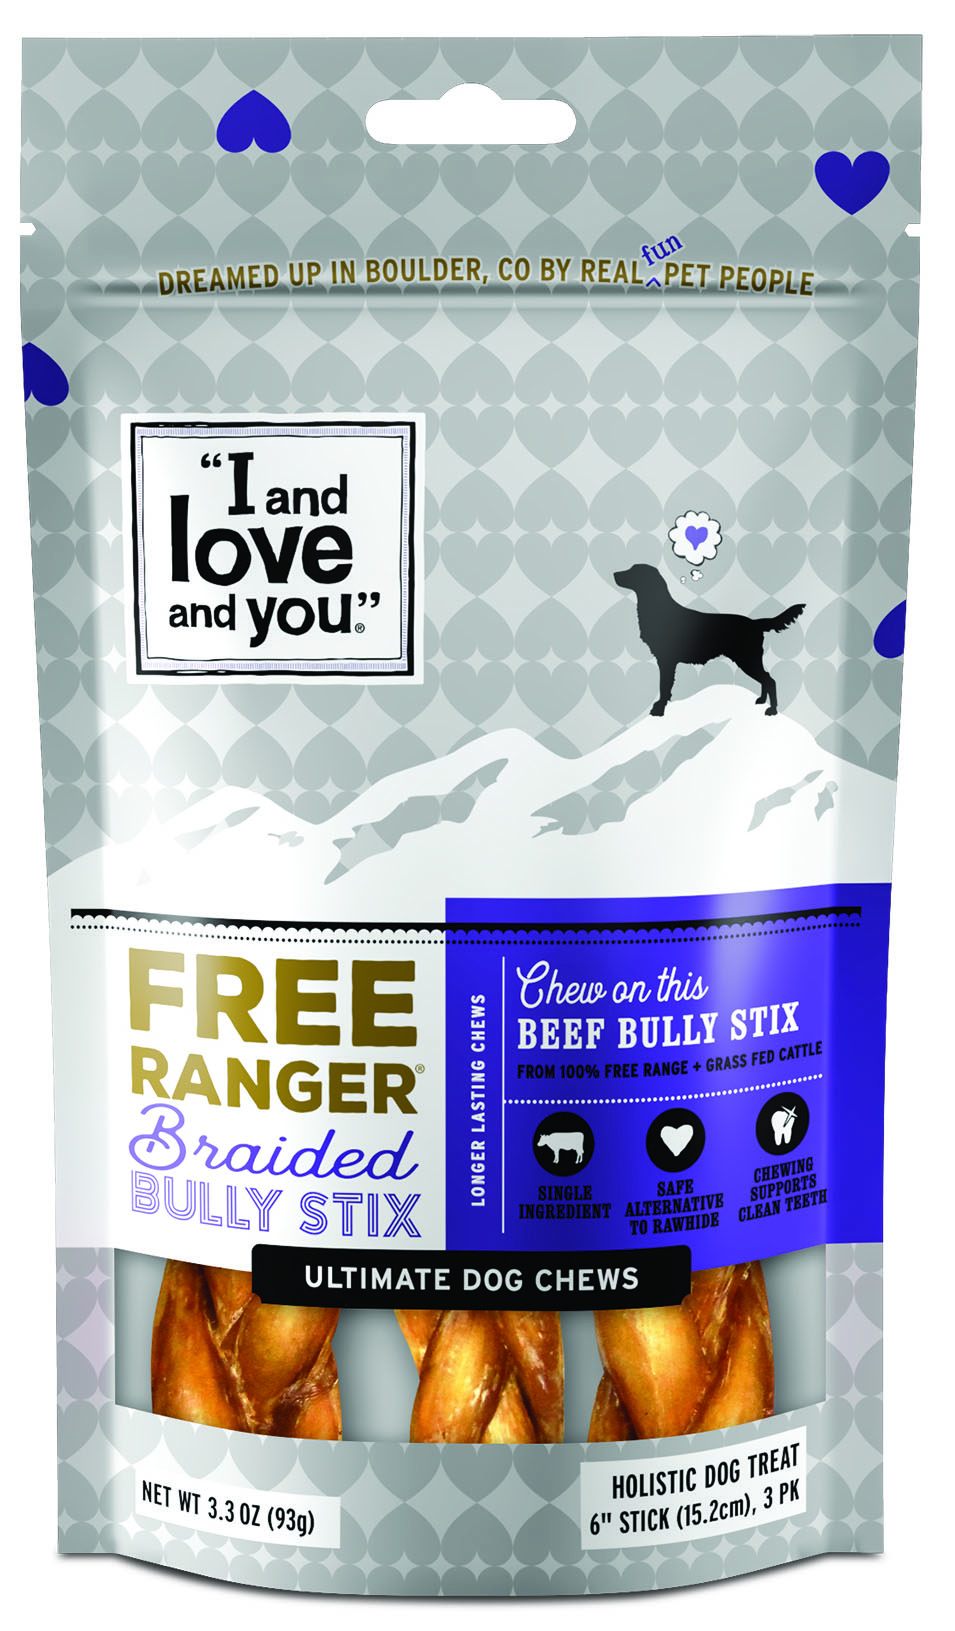 I and Love and You's Free Ranger Braided Bully Stix